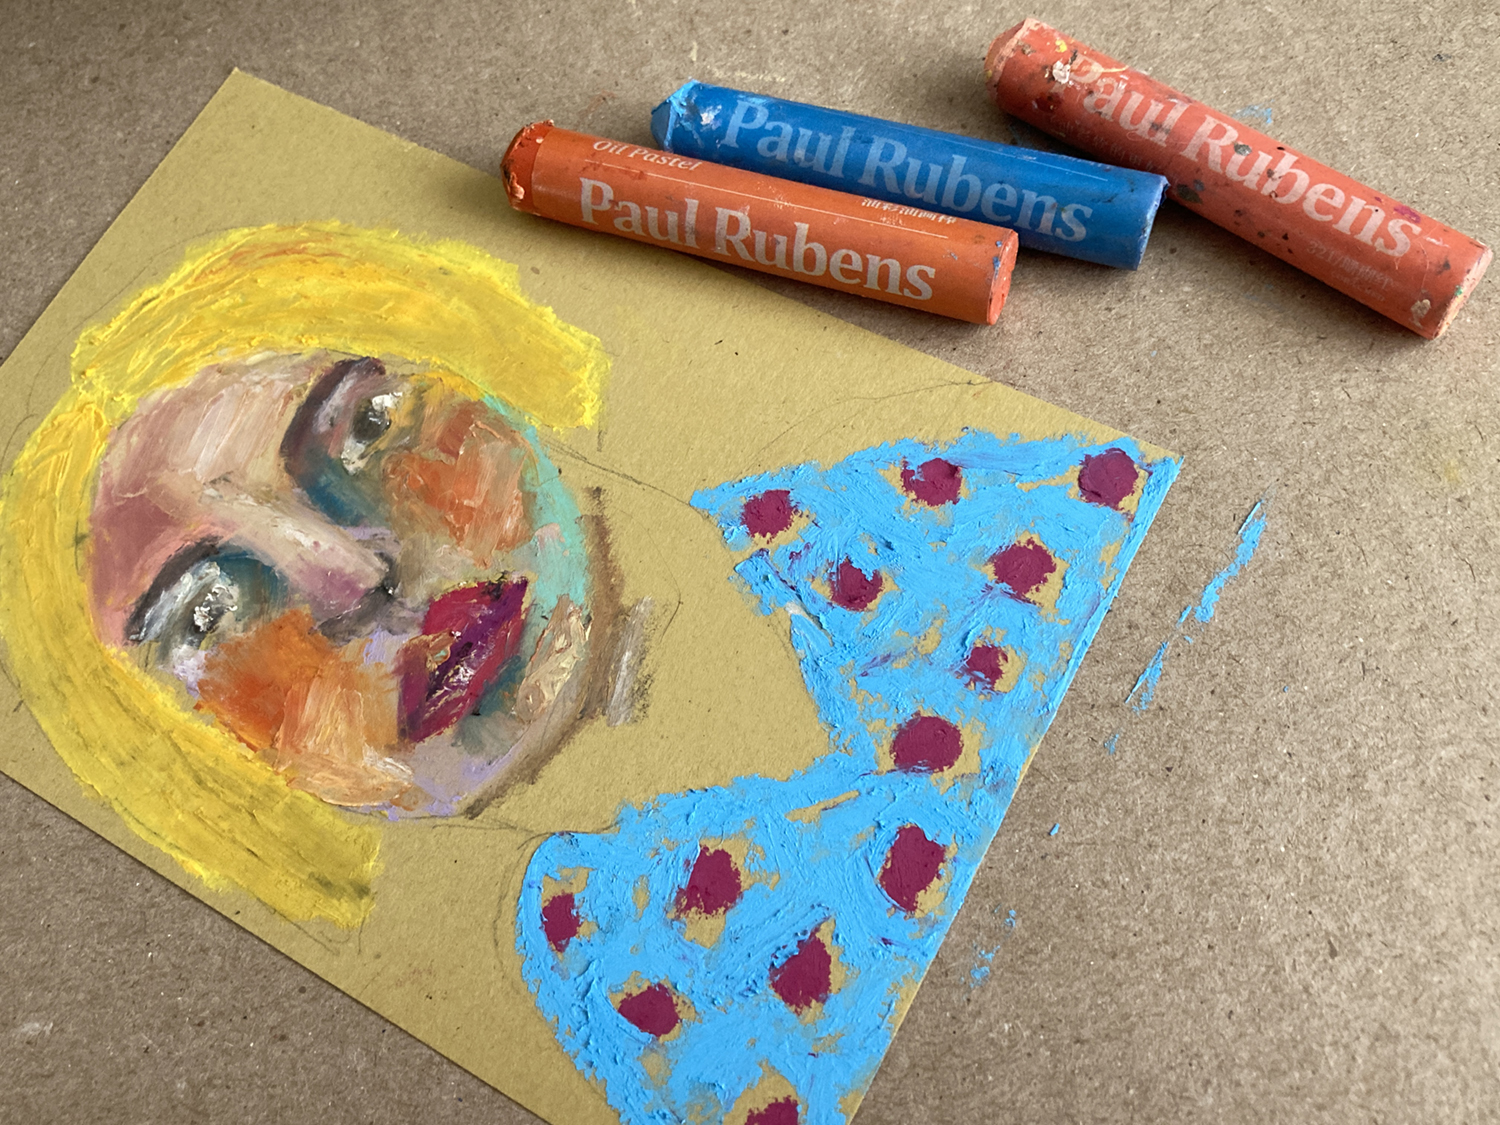 Paul Rubens Pearlescent Oil Pastels - The Artistic Gnome Blog